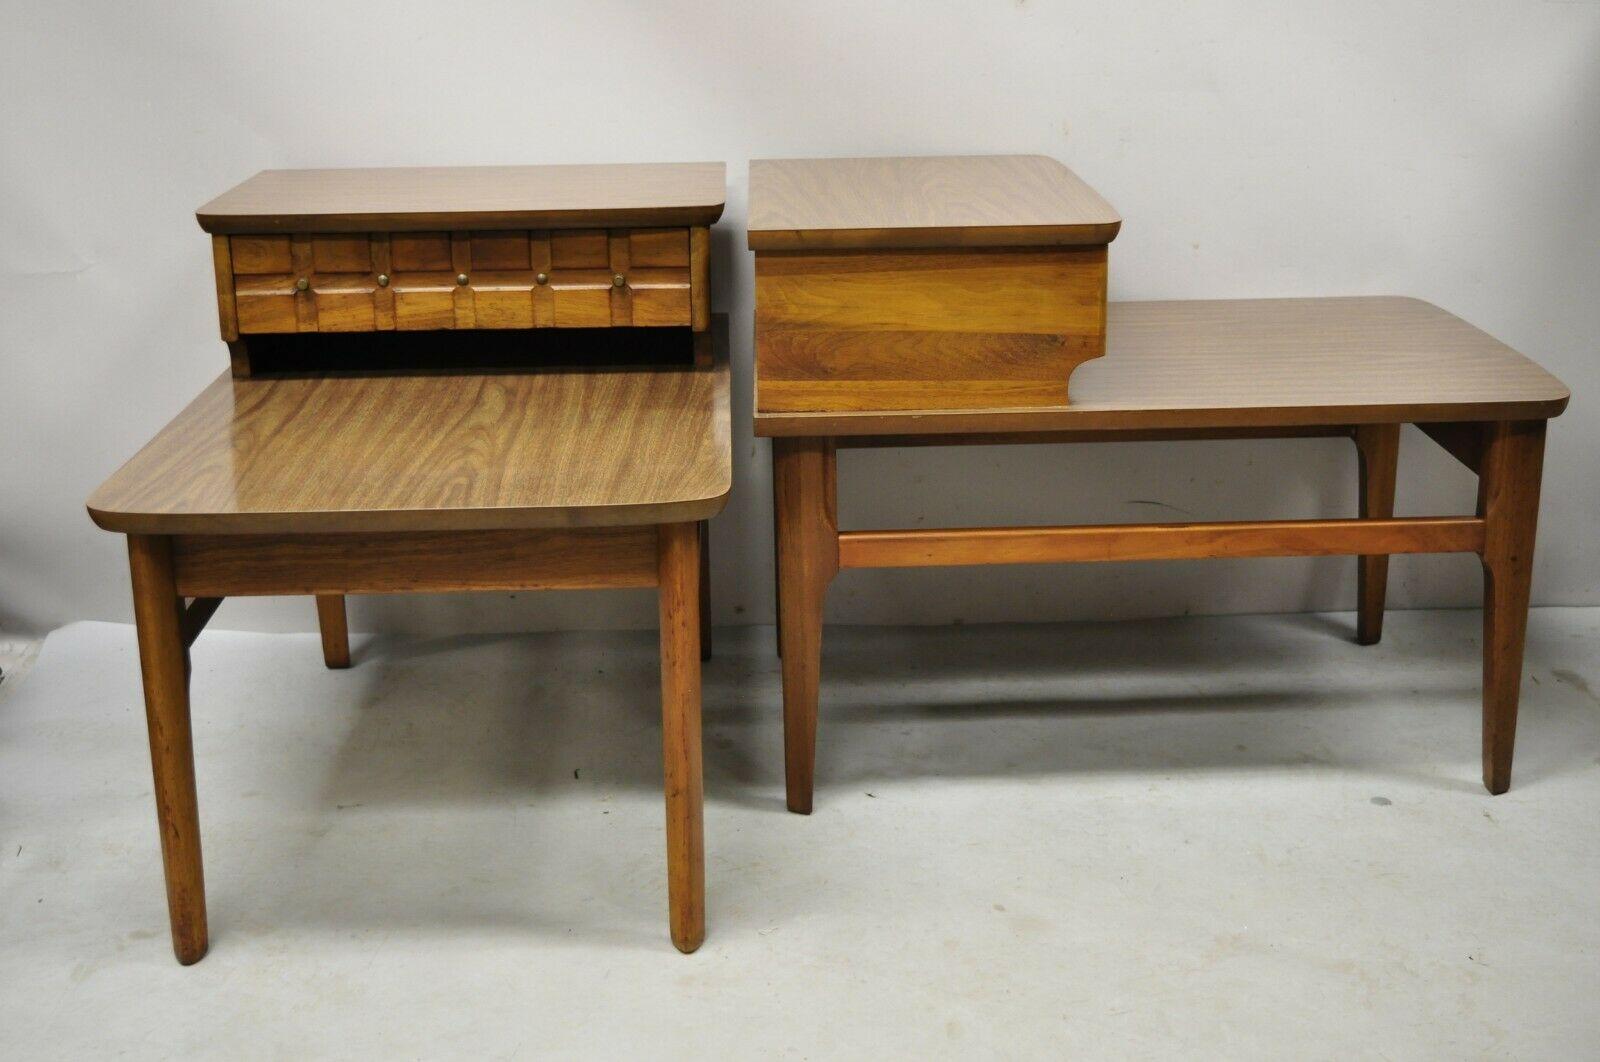 American Mersman Mid Century Modern Walnut and Laminate Step Side End Tables - a Pair For Sale